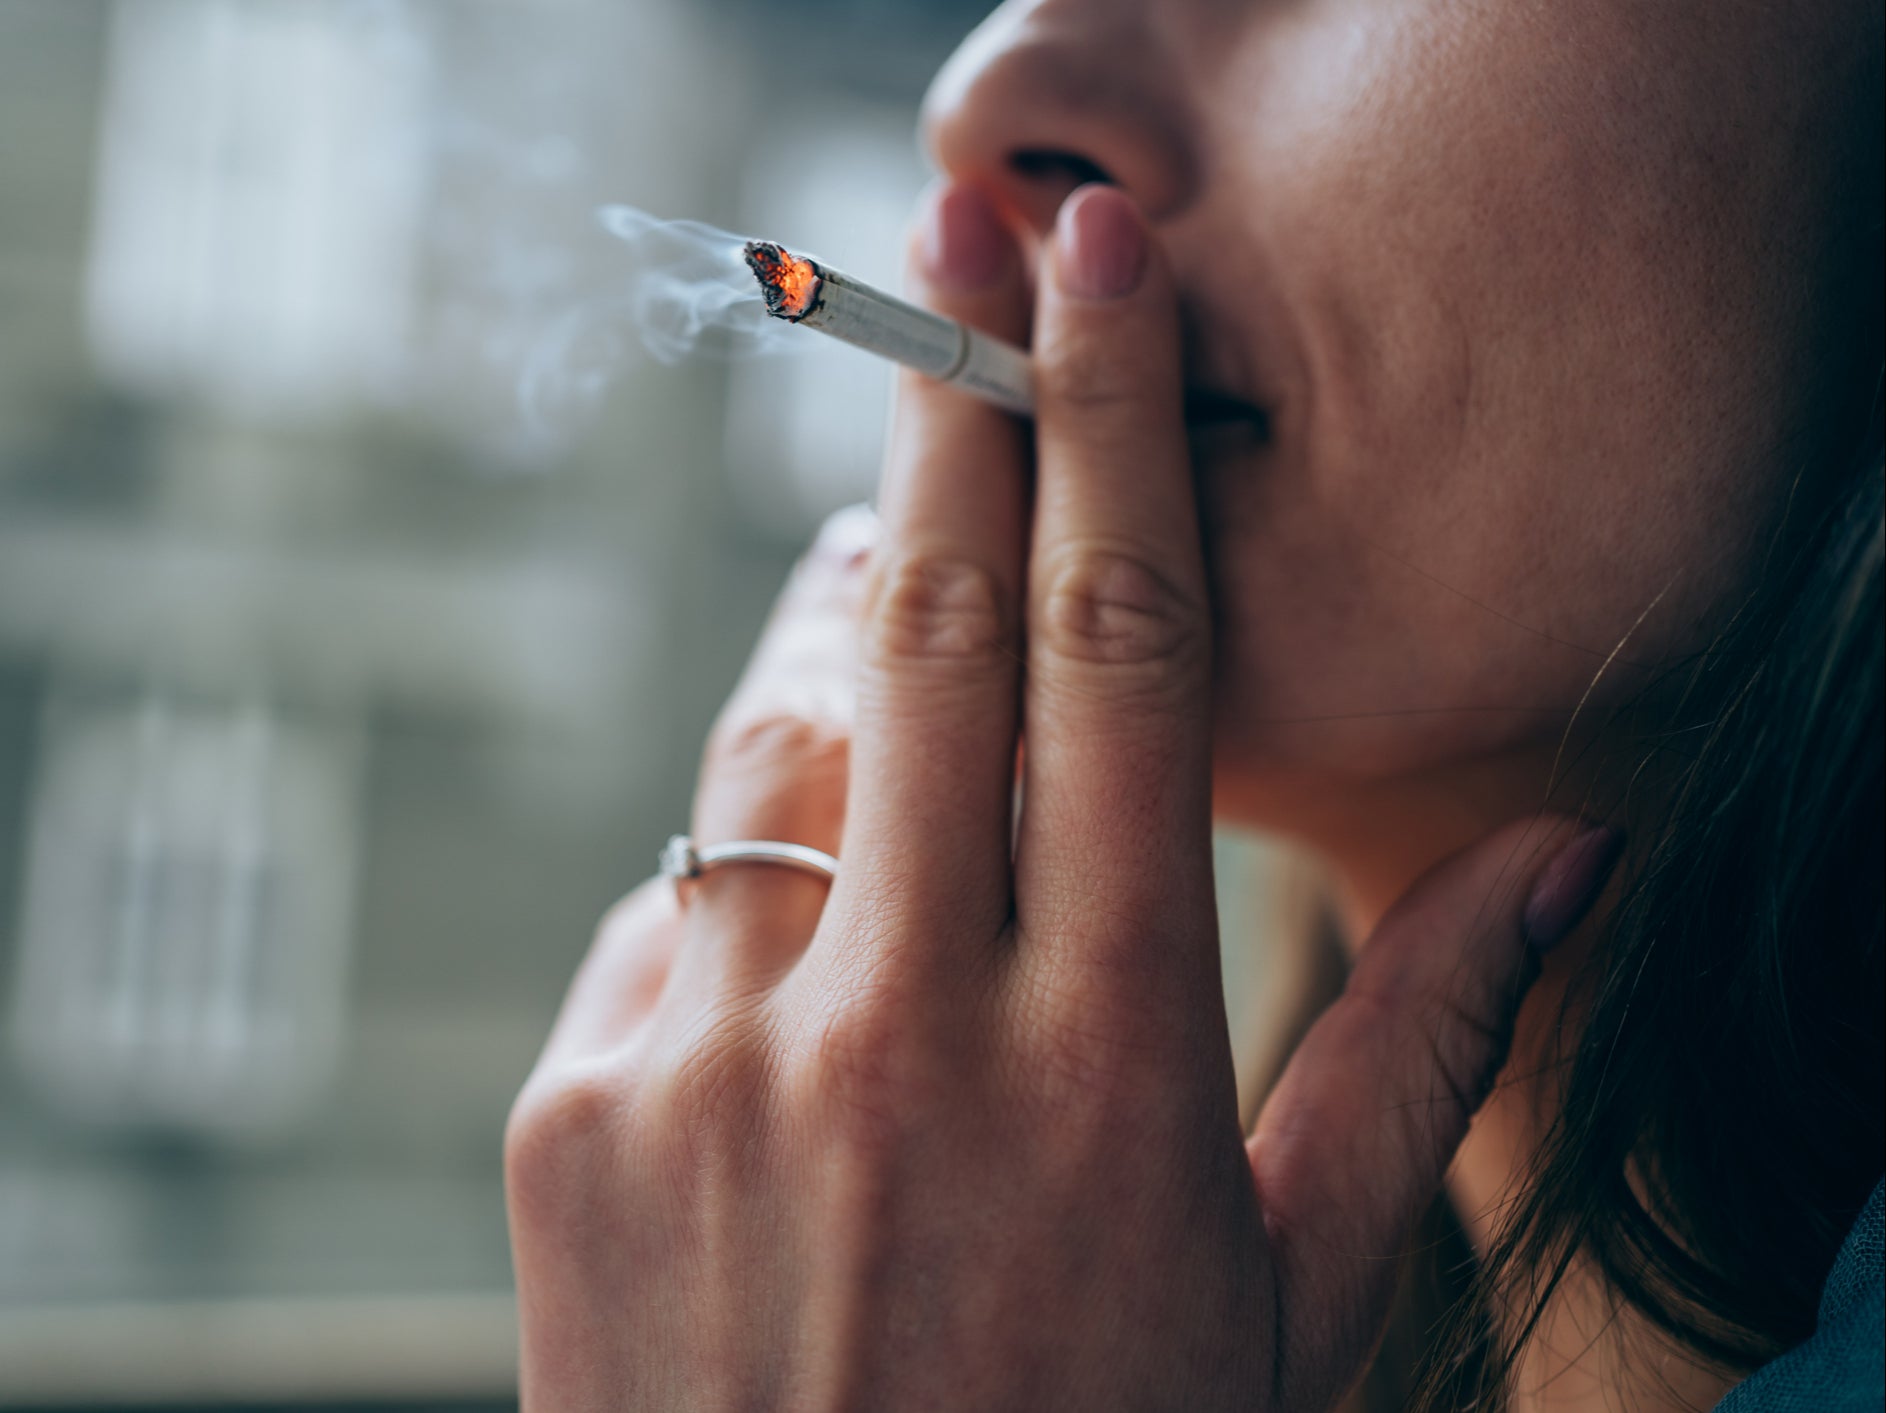 Smoking is linked to memory loss in middle-aged people